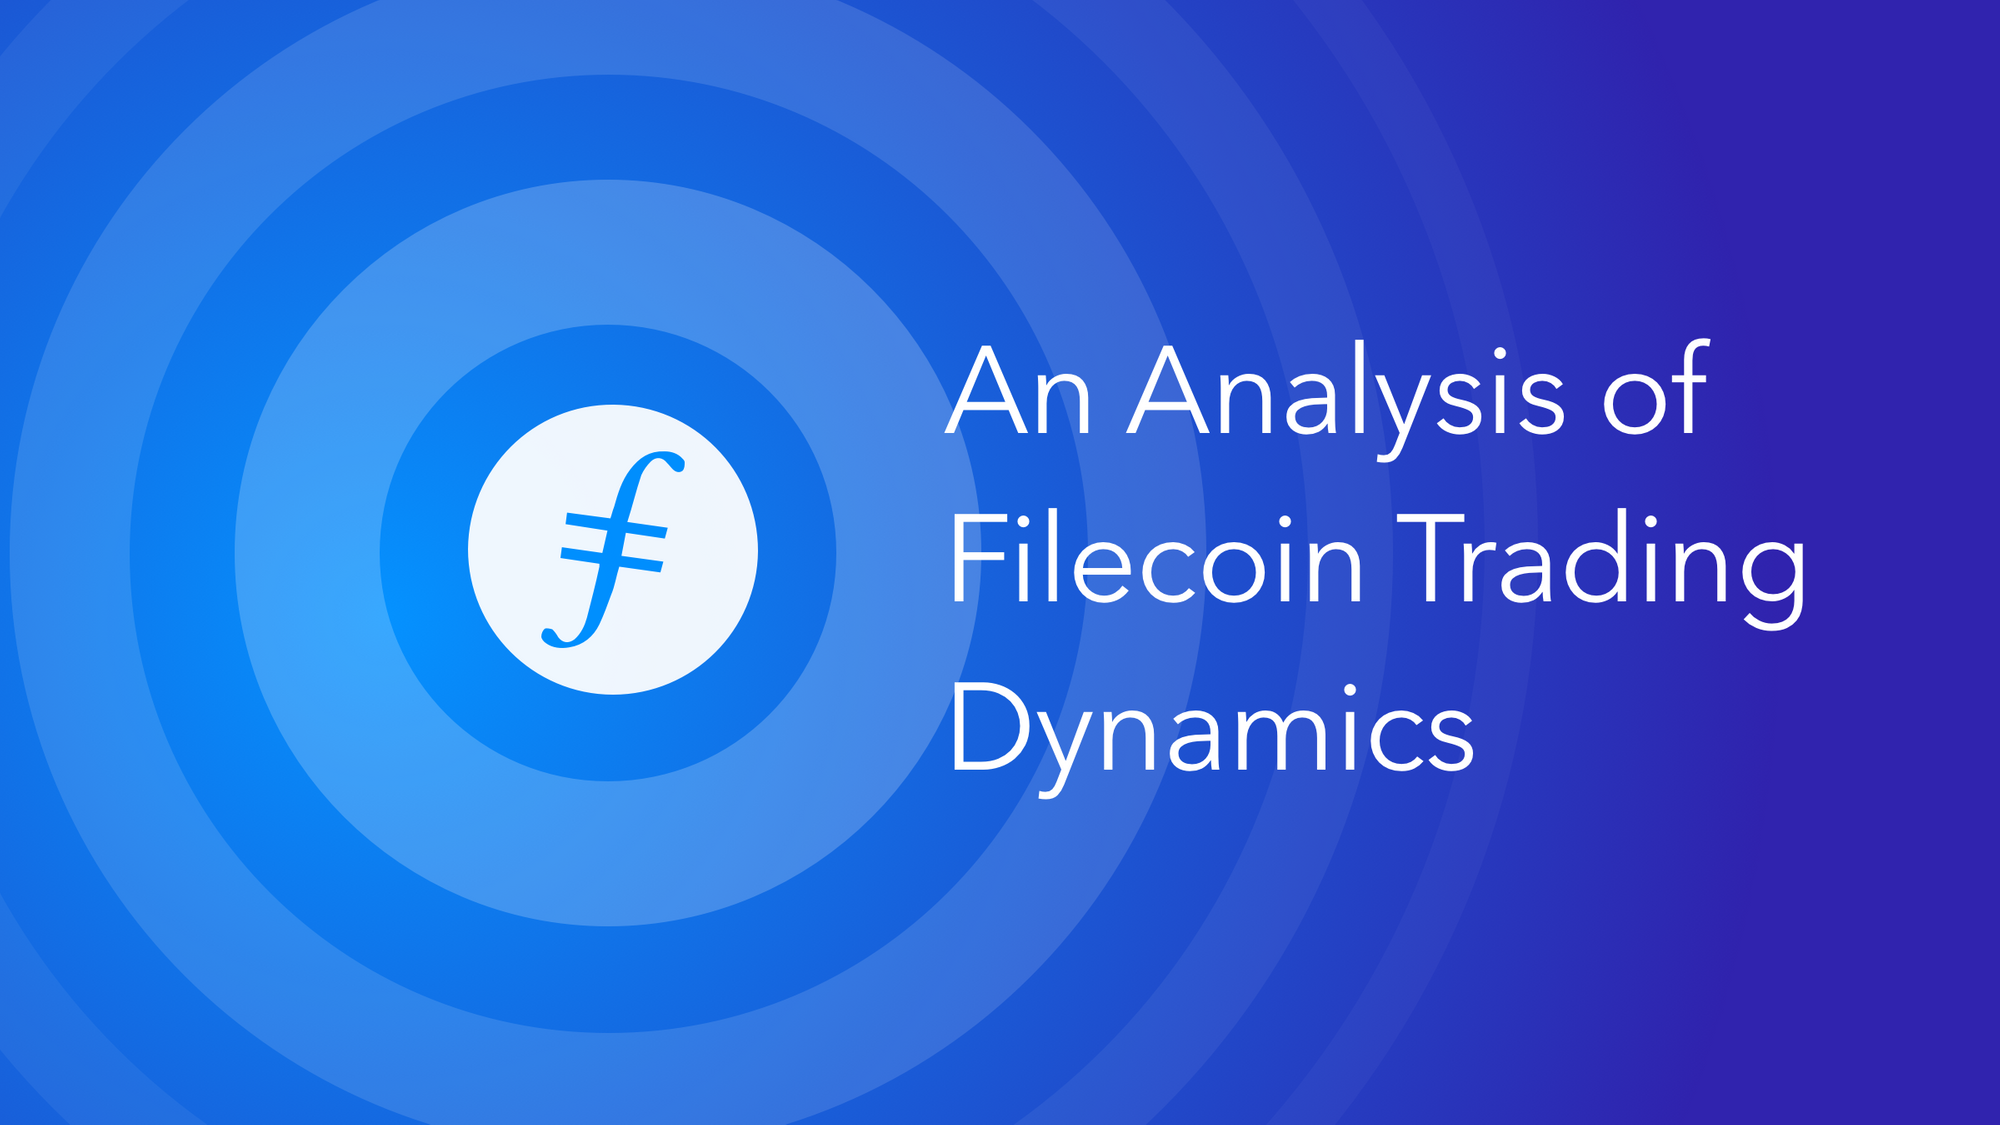 An Analysis of Filecoin Trading Dynamics